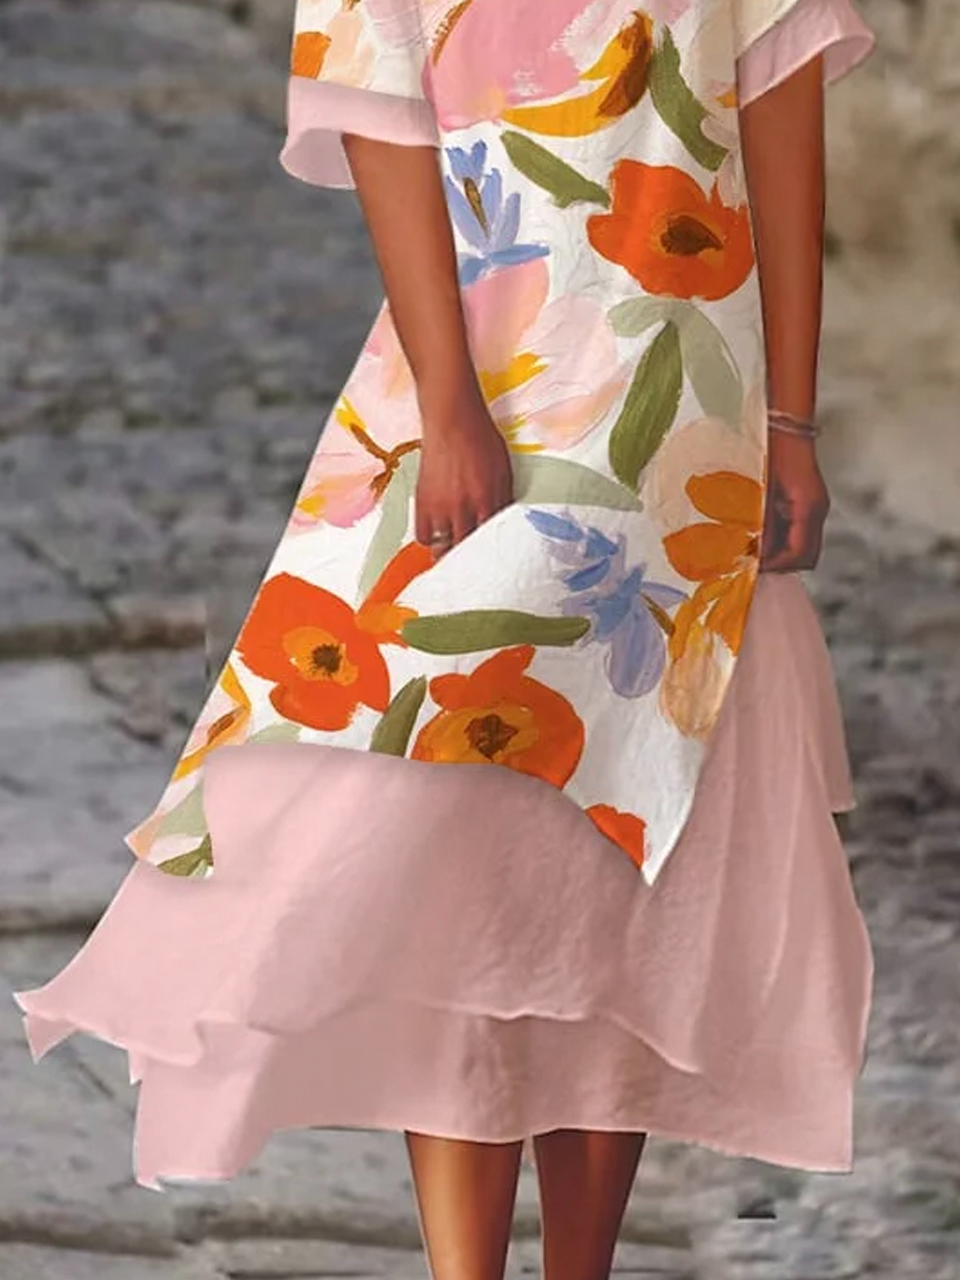 Casual Crew Neck Loose Floral Dress